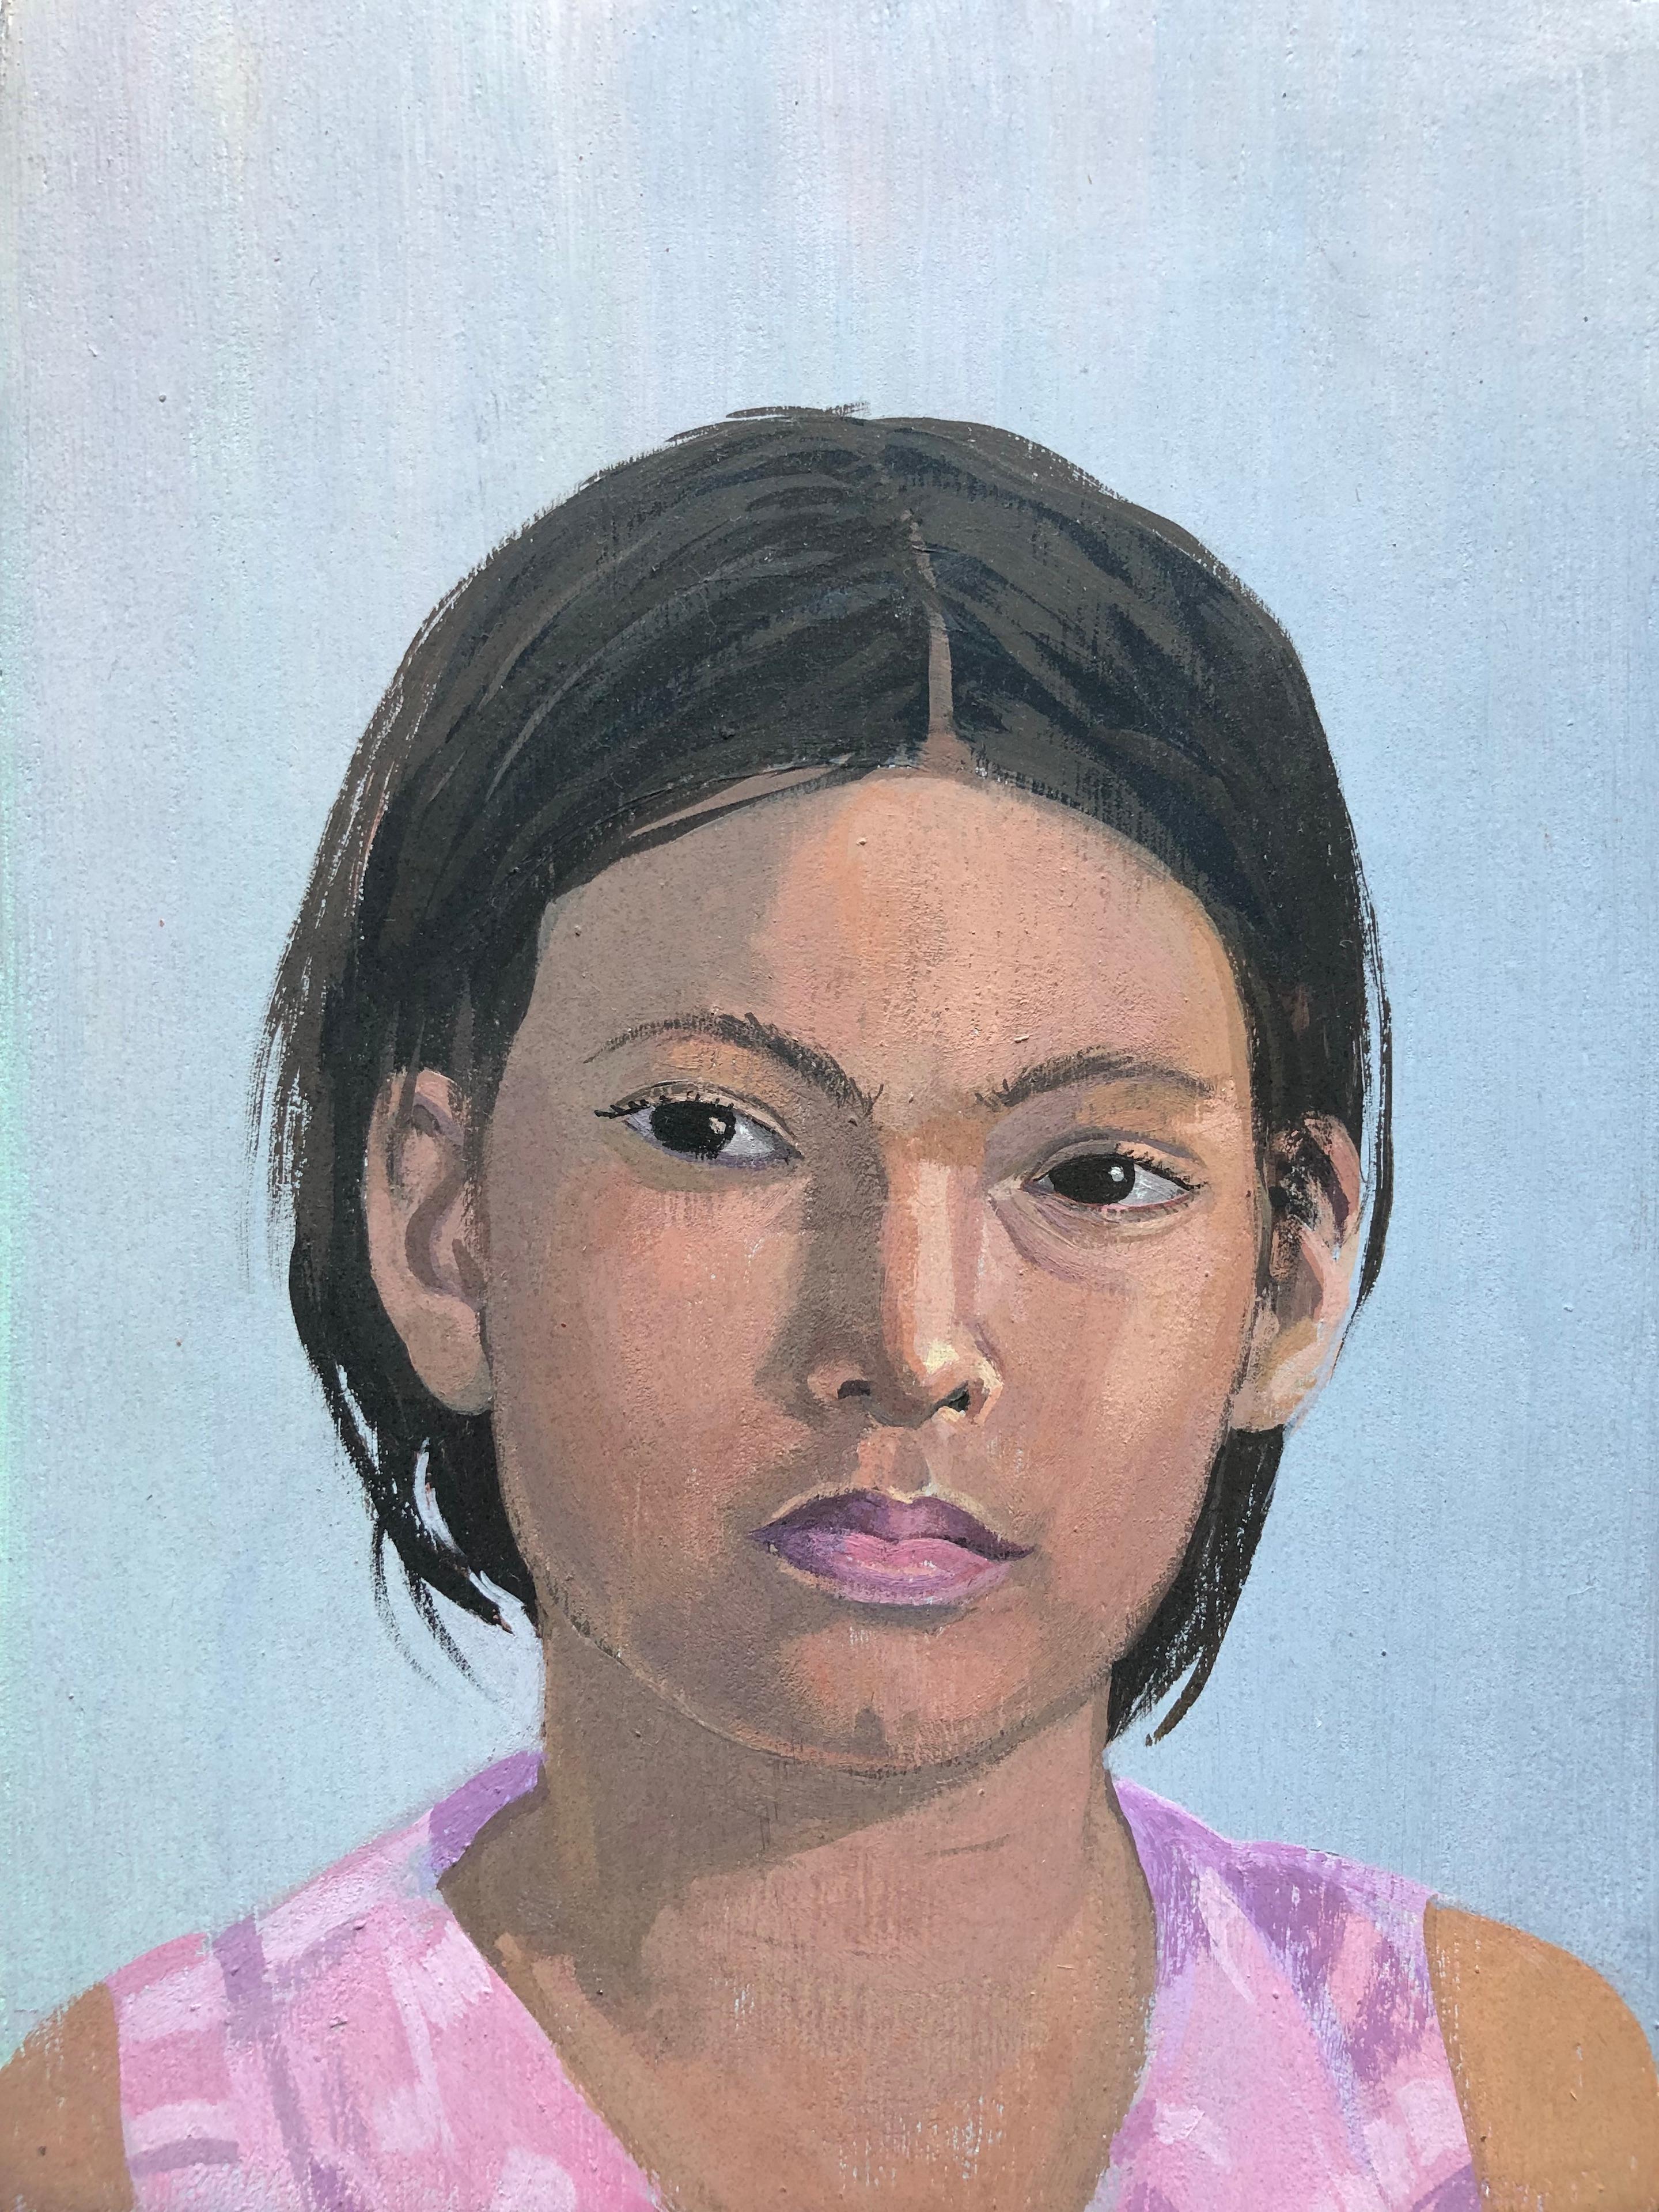 Girl Friends #1 - Figurative portrait of a young girl